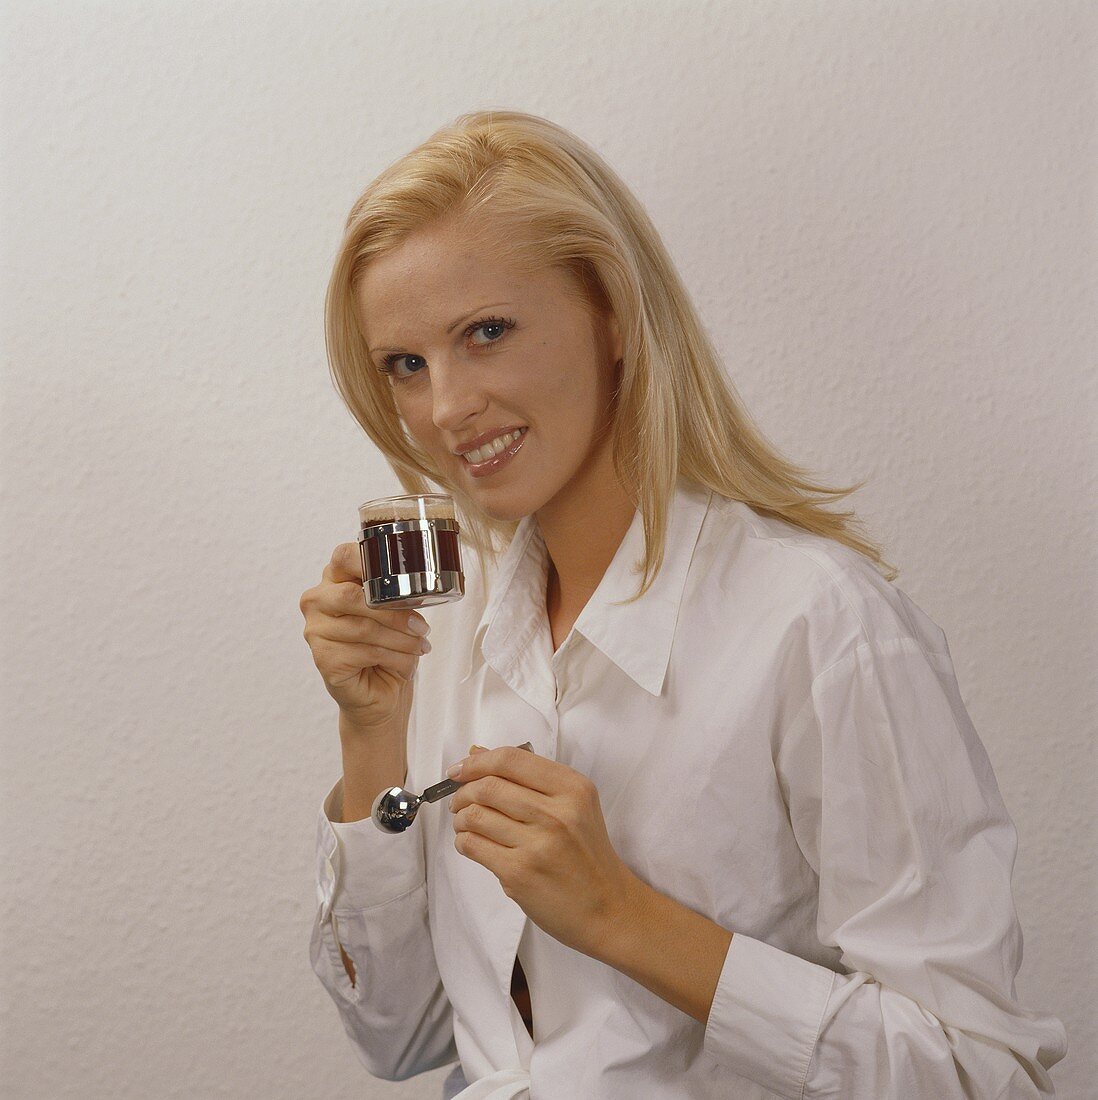 Blond woman drinking espresso from a glass